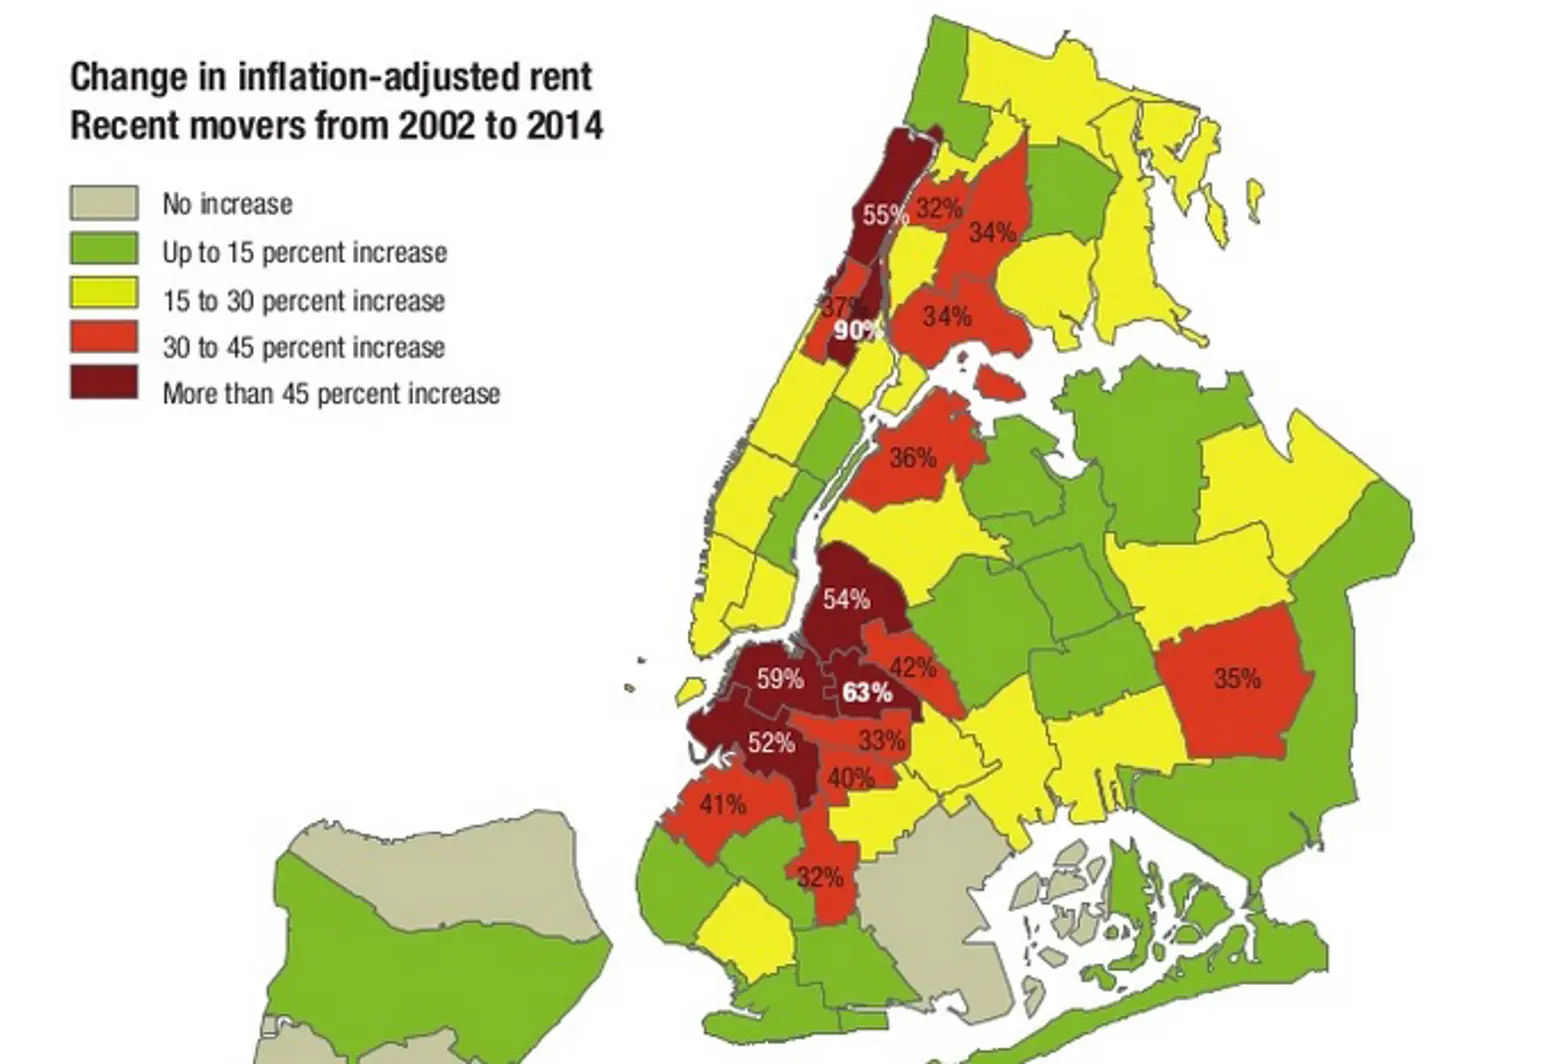 Harlem Rents Jump 90 Percent over the Past 12 Years, Bed-Stuy Not Much Better at 63 Percent